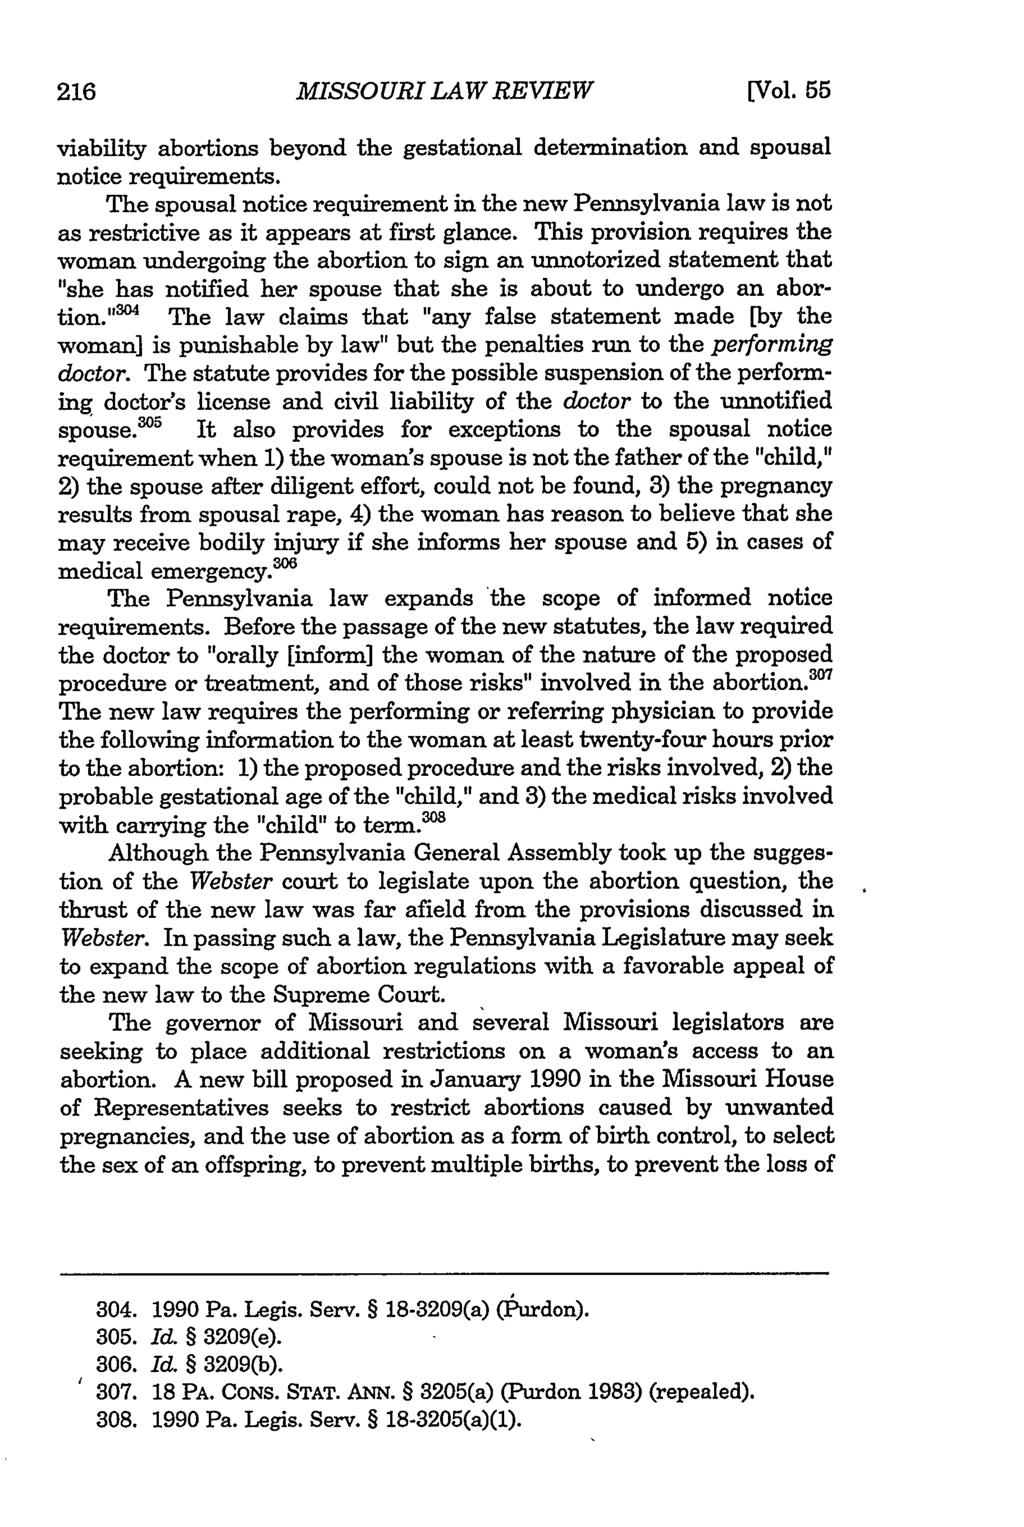 216 Missouri Law Review, Vol. 55, Iss. 1 [1990], Art. 5 MISSOURI LAW REVIEW [Vol. 55 viability abortions beyond the gestational determination and spousal notice requirements.